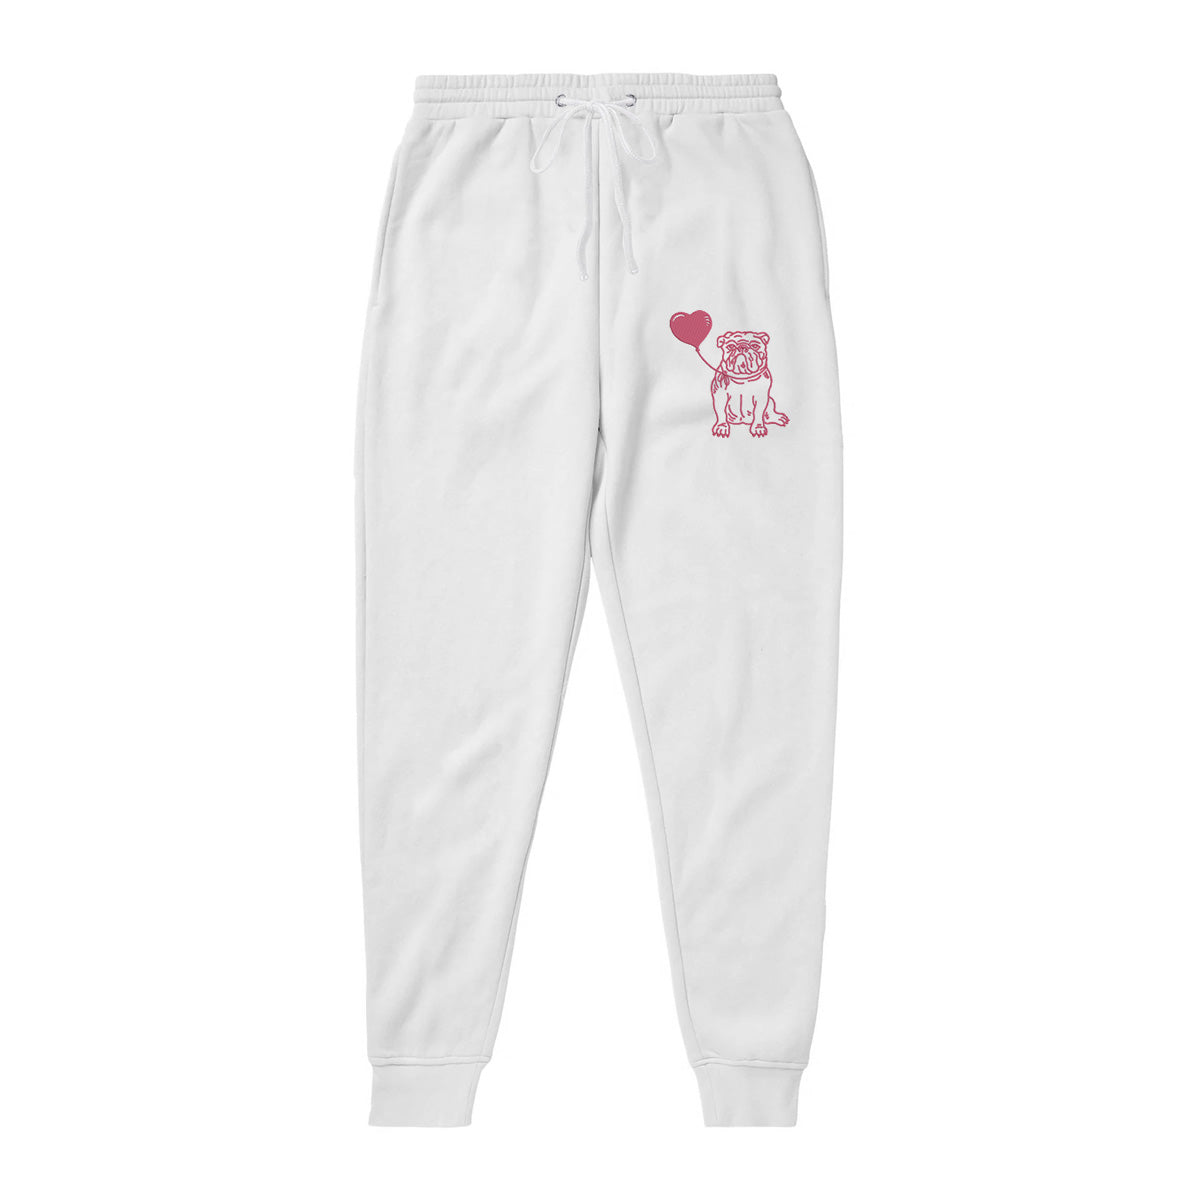 Load image into Gallery viewer, Bulldog Love Embroidery Sweatpants (White)
